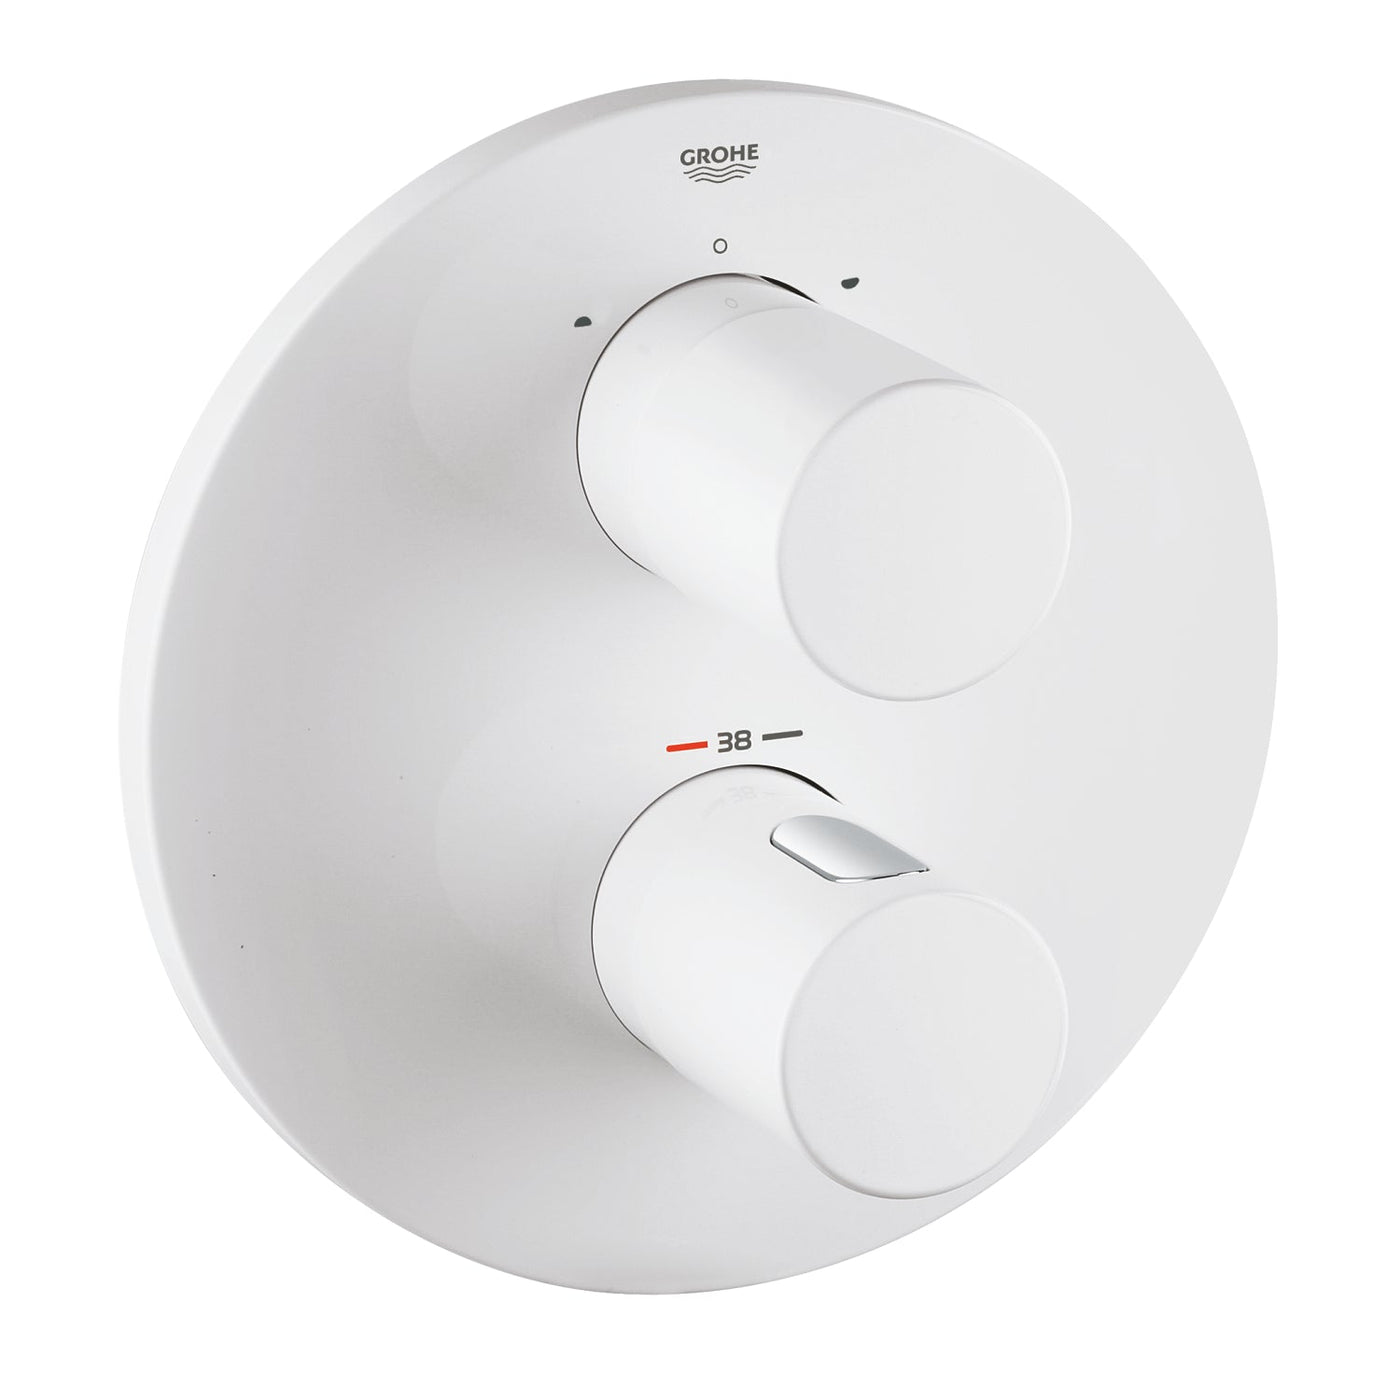 Grohe Moon White Grohtherm 3000 Cosmopolitan Thermostat with integrated 2-way diverter
for bath or shower with more than one outlet - Letta London - Twin Valves With Diverter